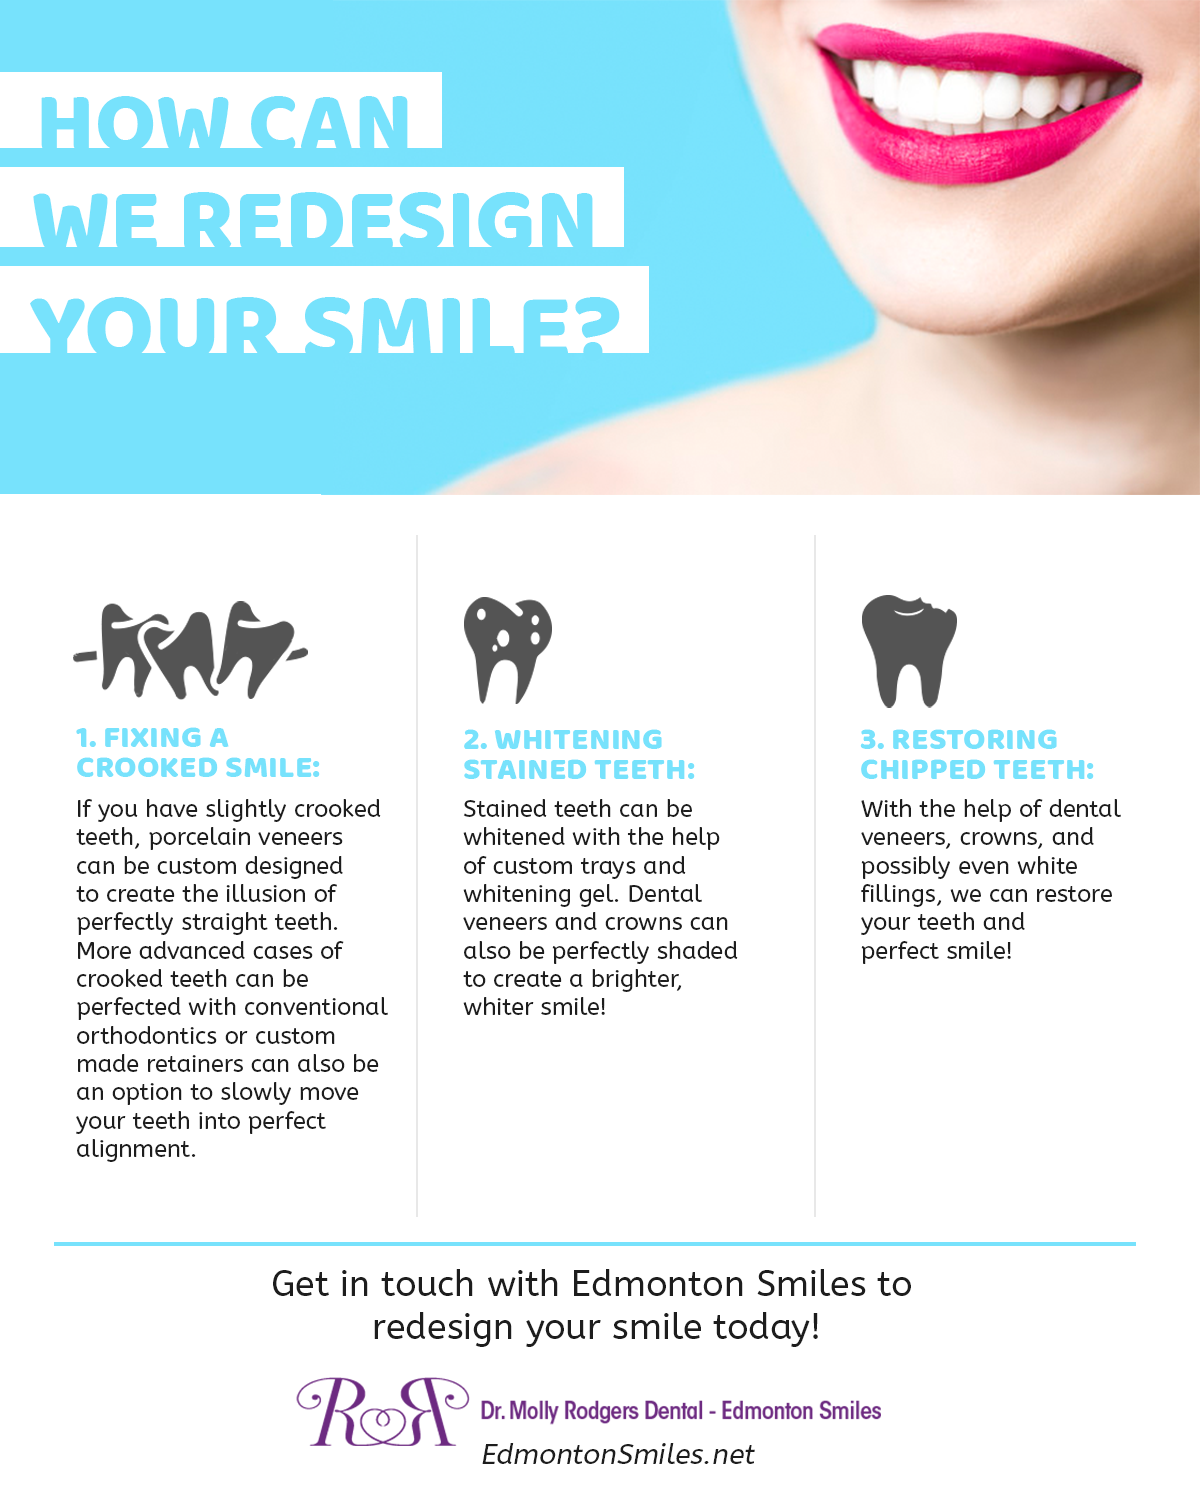 Redesign Your Smile